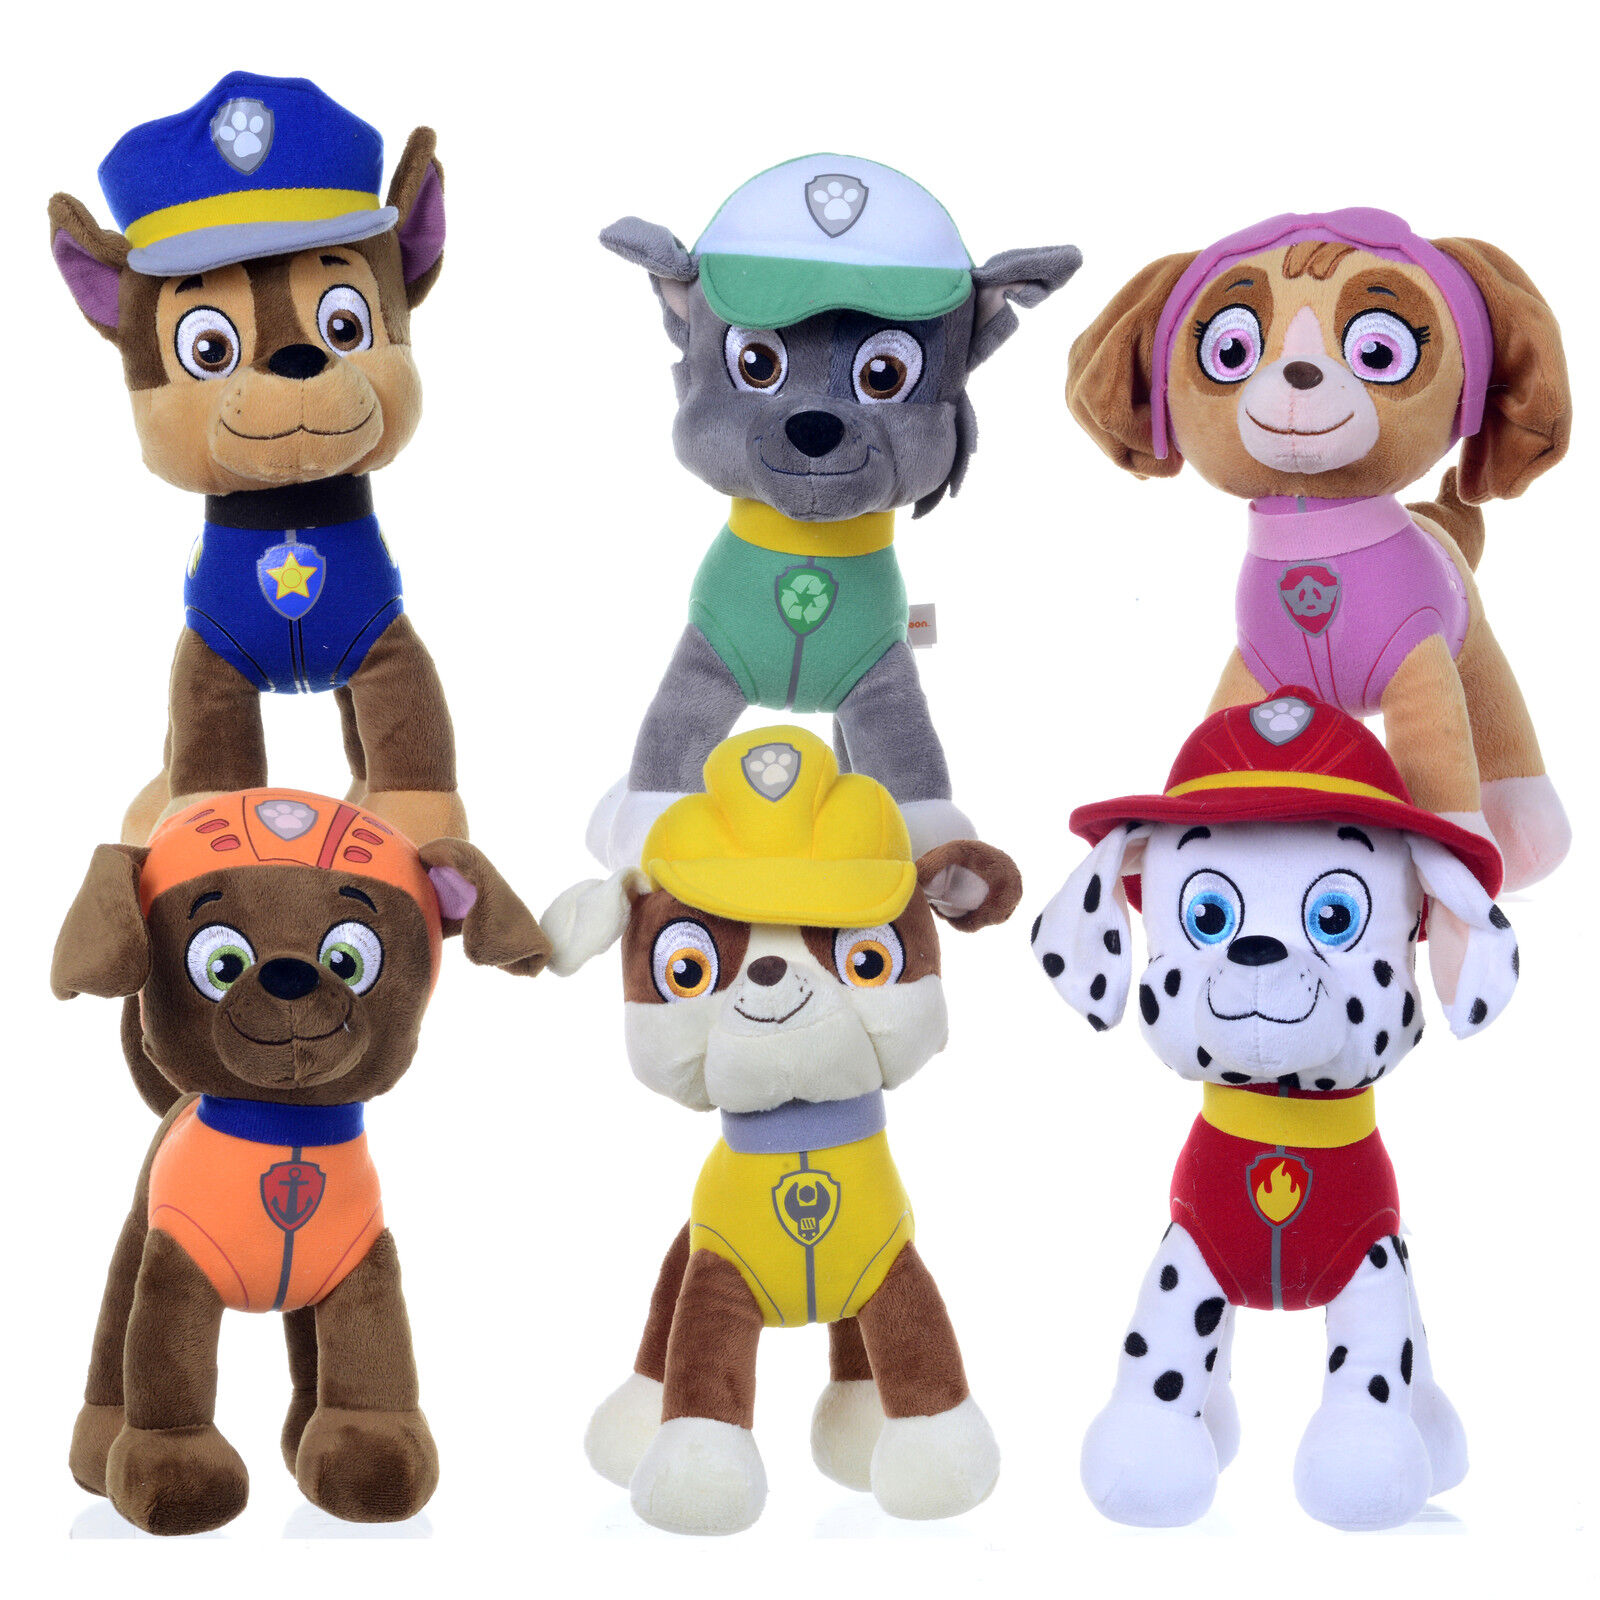 Paw Patrol Stuffed Toys: Join the Pup Squad